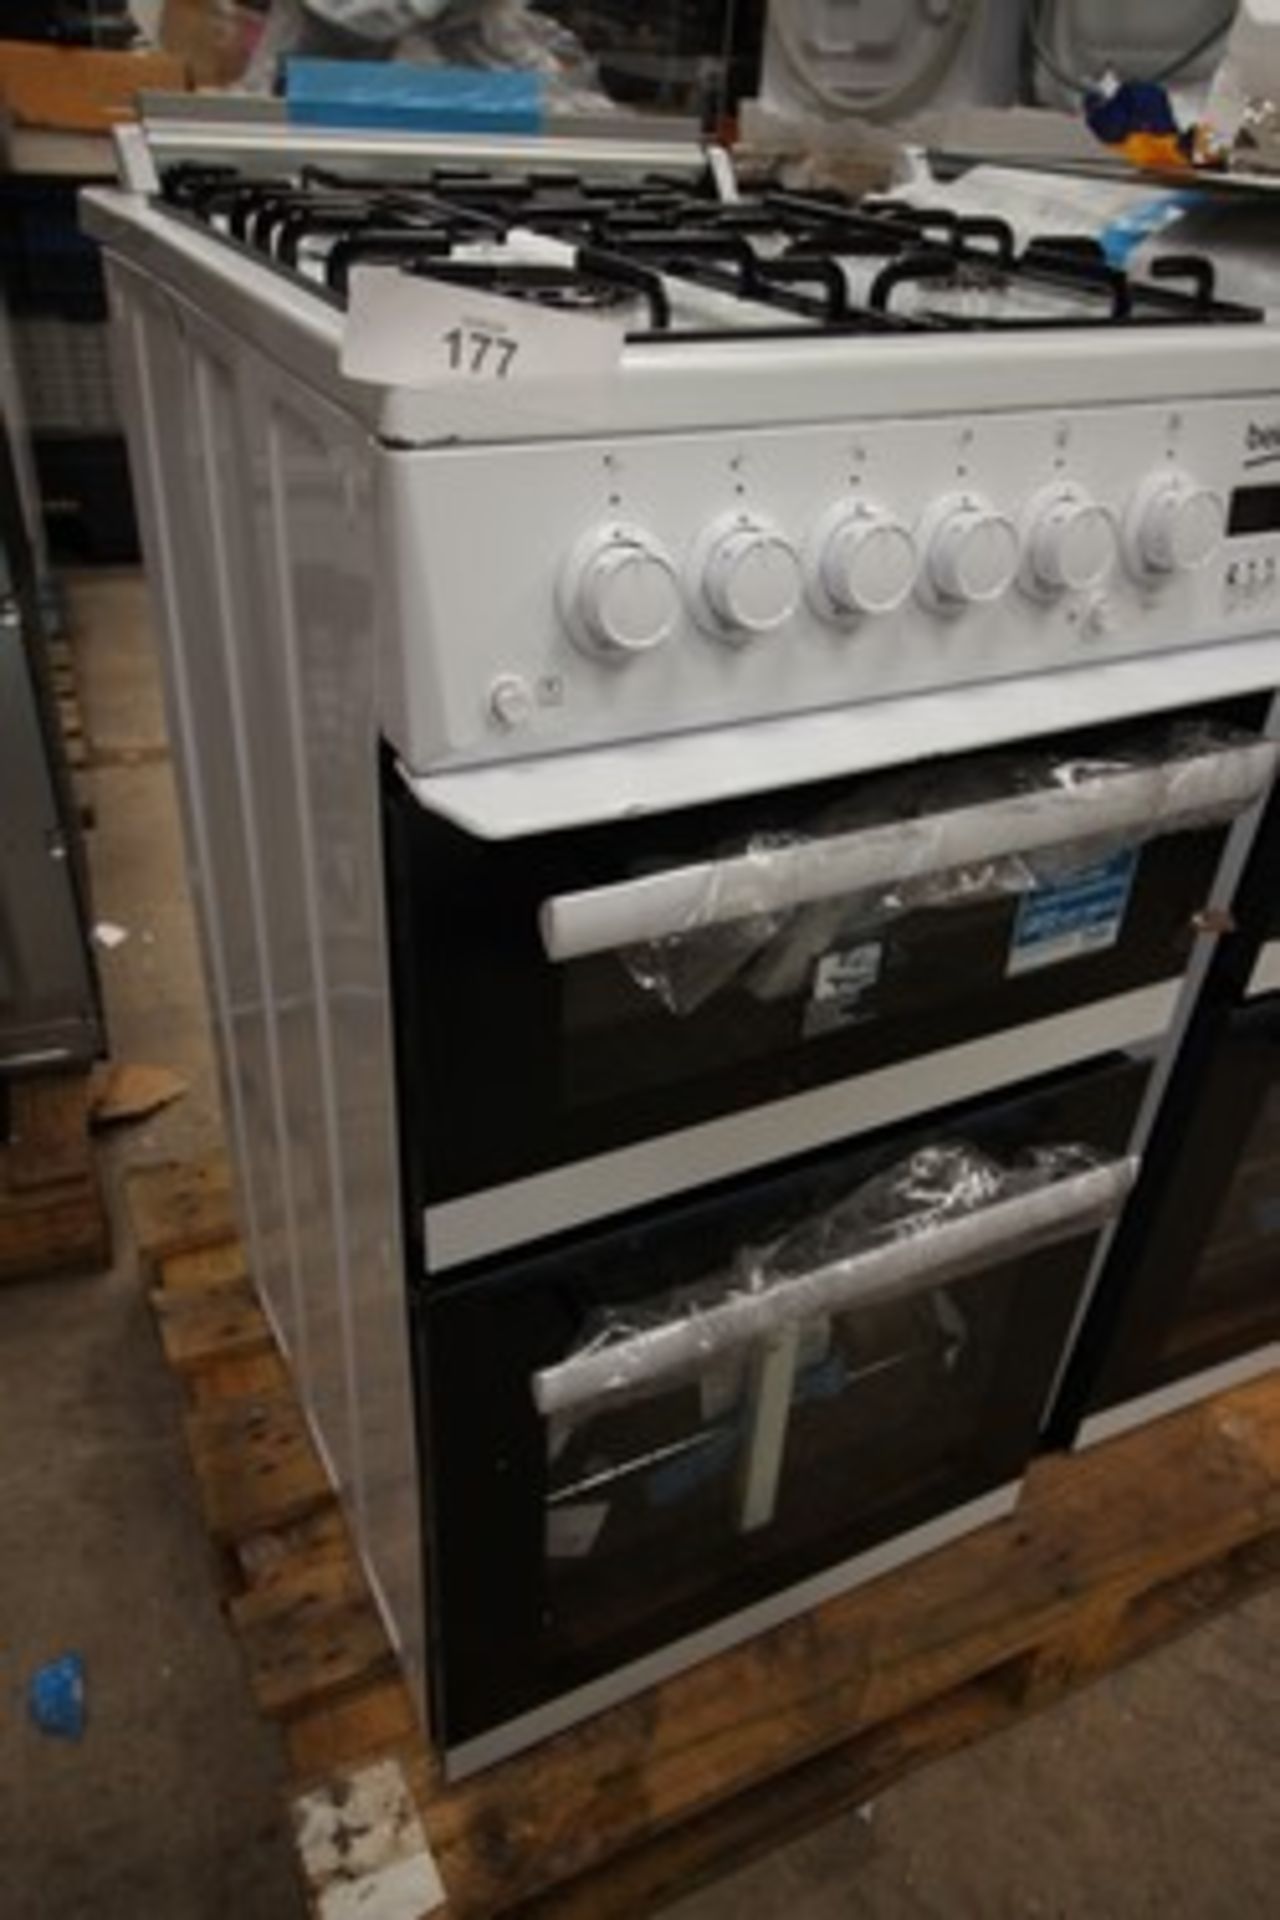 1 x Beko gas double oven and hob, Model EDG507W, dented top panel (RHS), dented and scratched heat